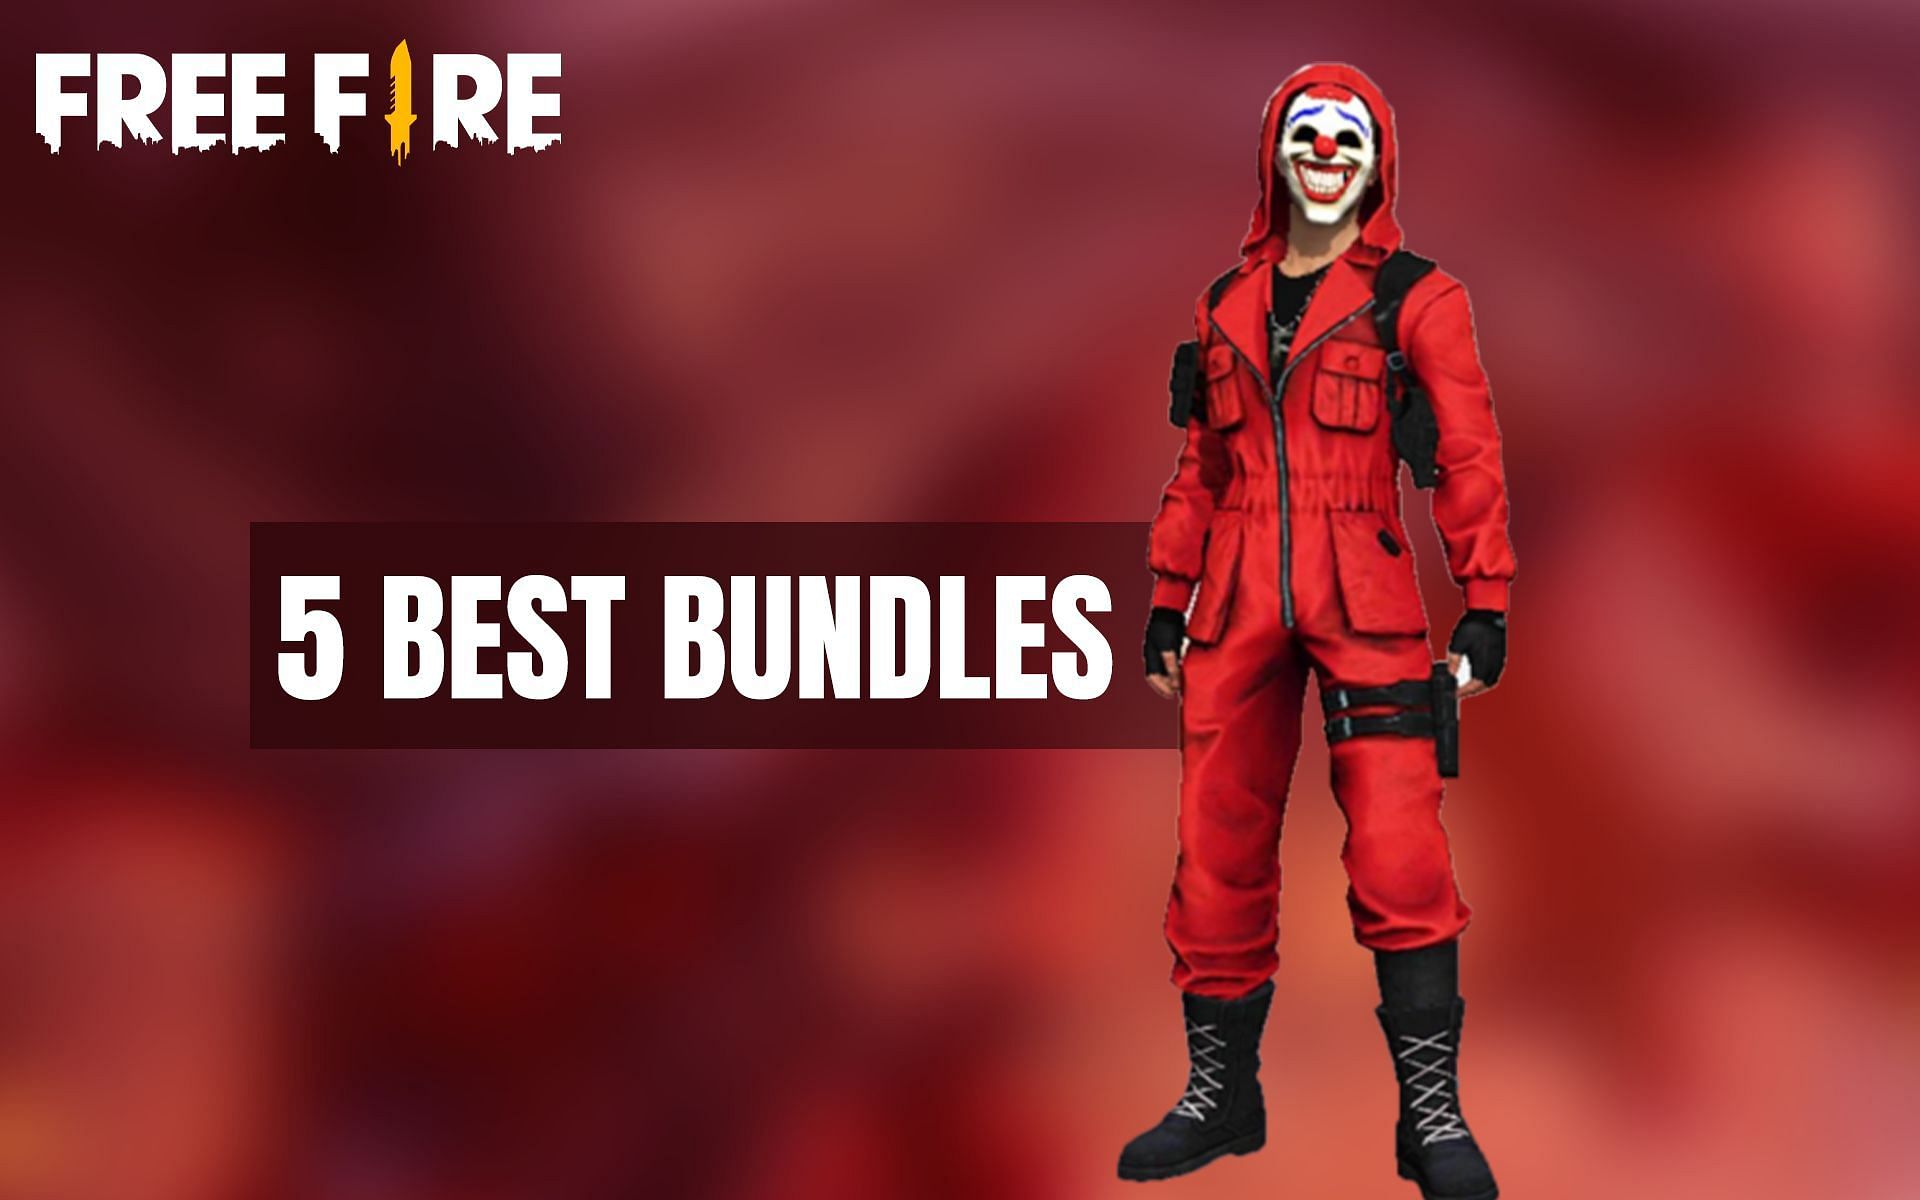 Many players hunt for the rare bundles in Free Fire (Image via Sportskeeda)